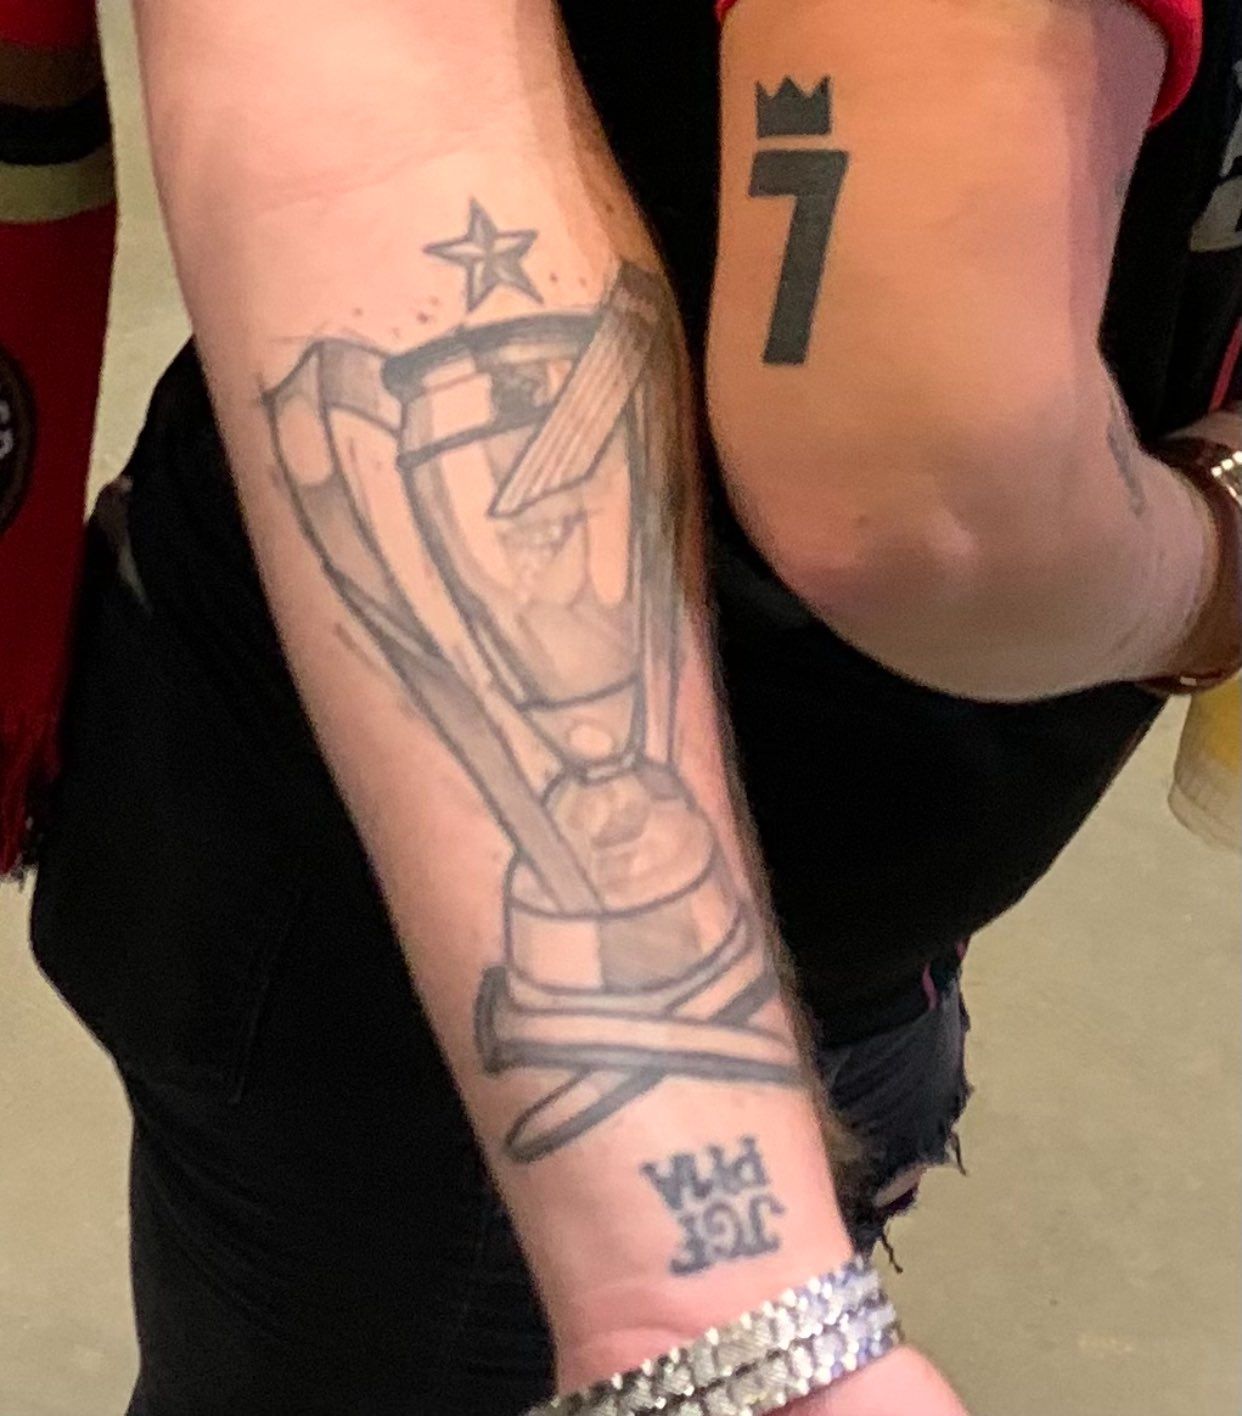 Two arms with Atlanta United-inspired tattoos